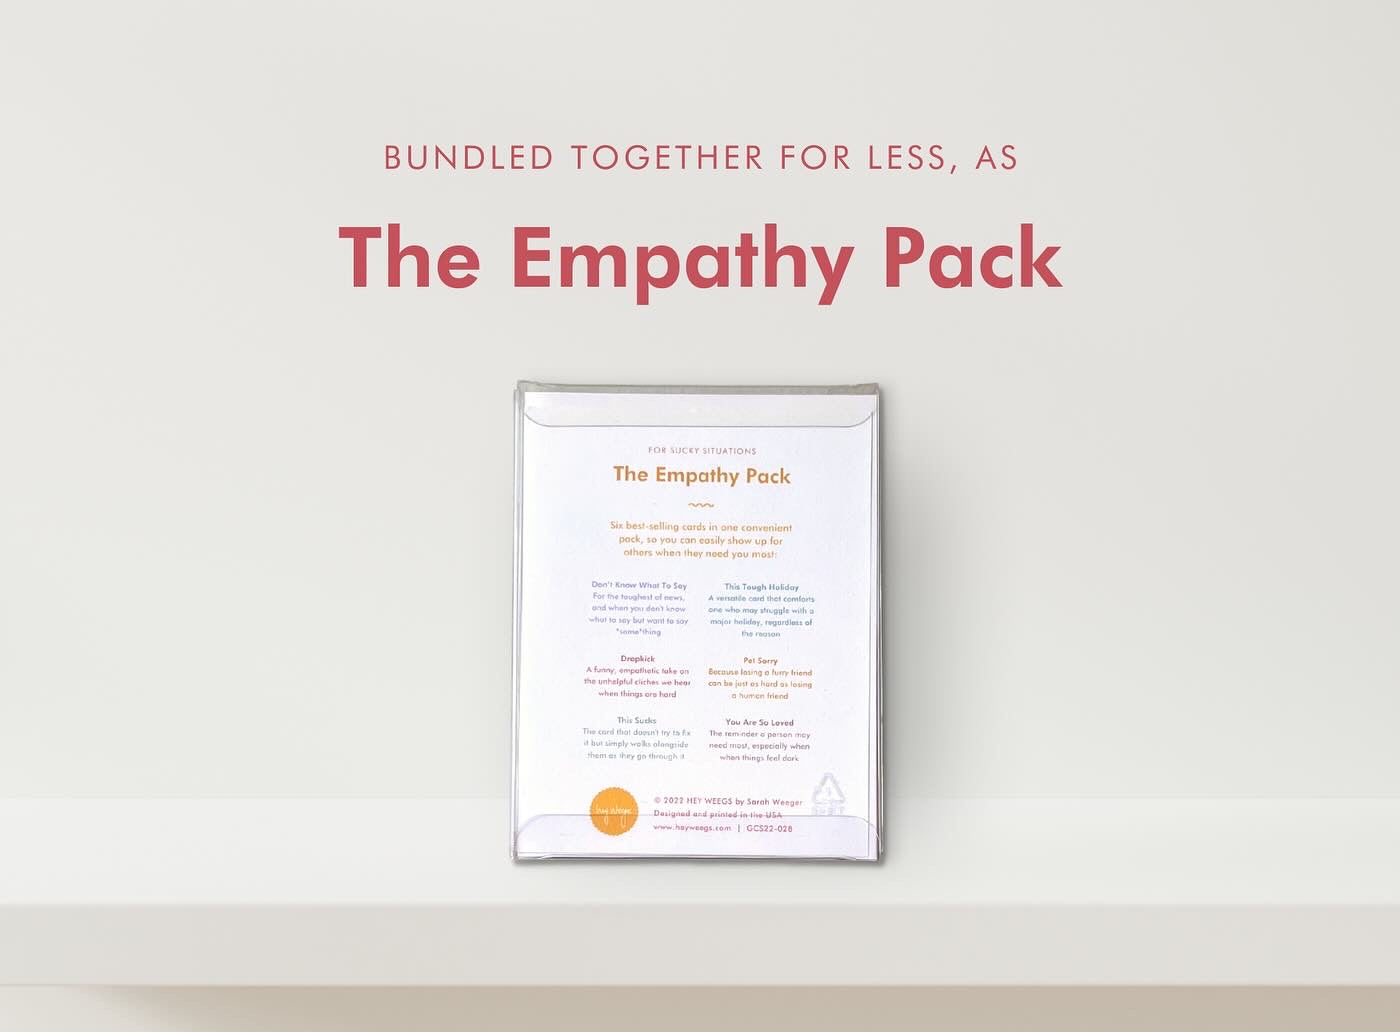 The Empathy Pack